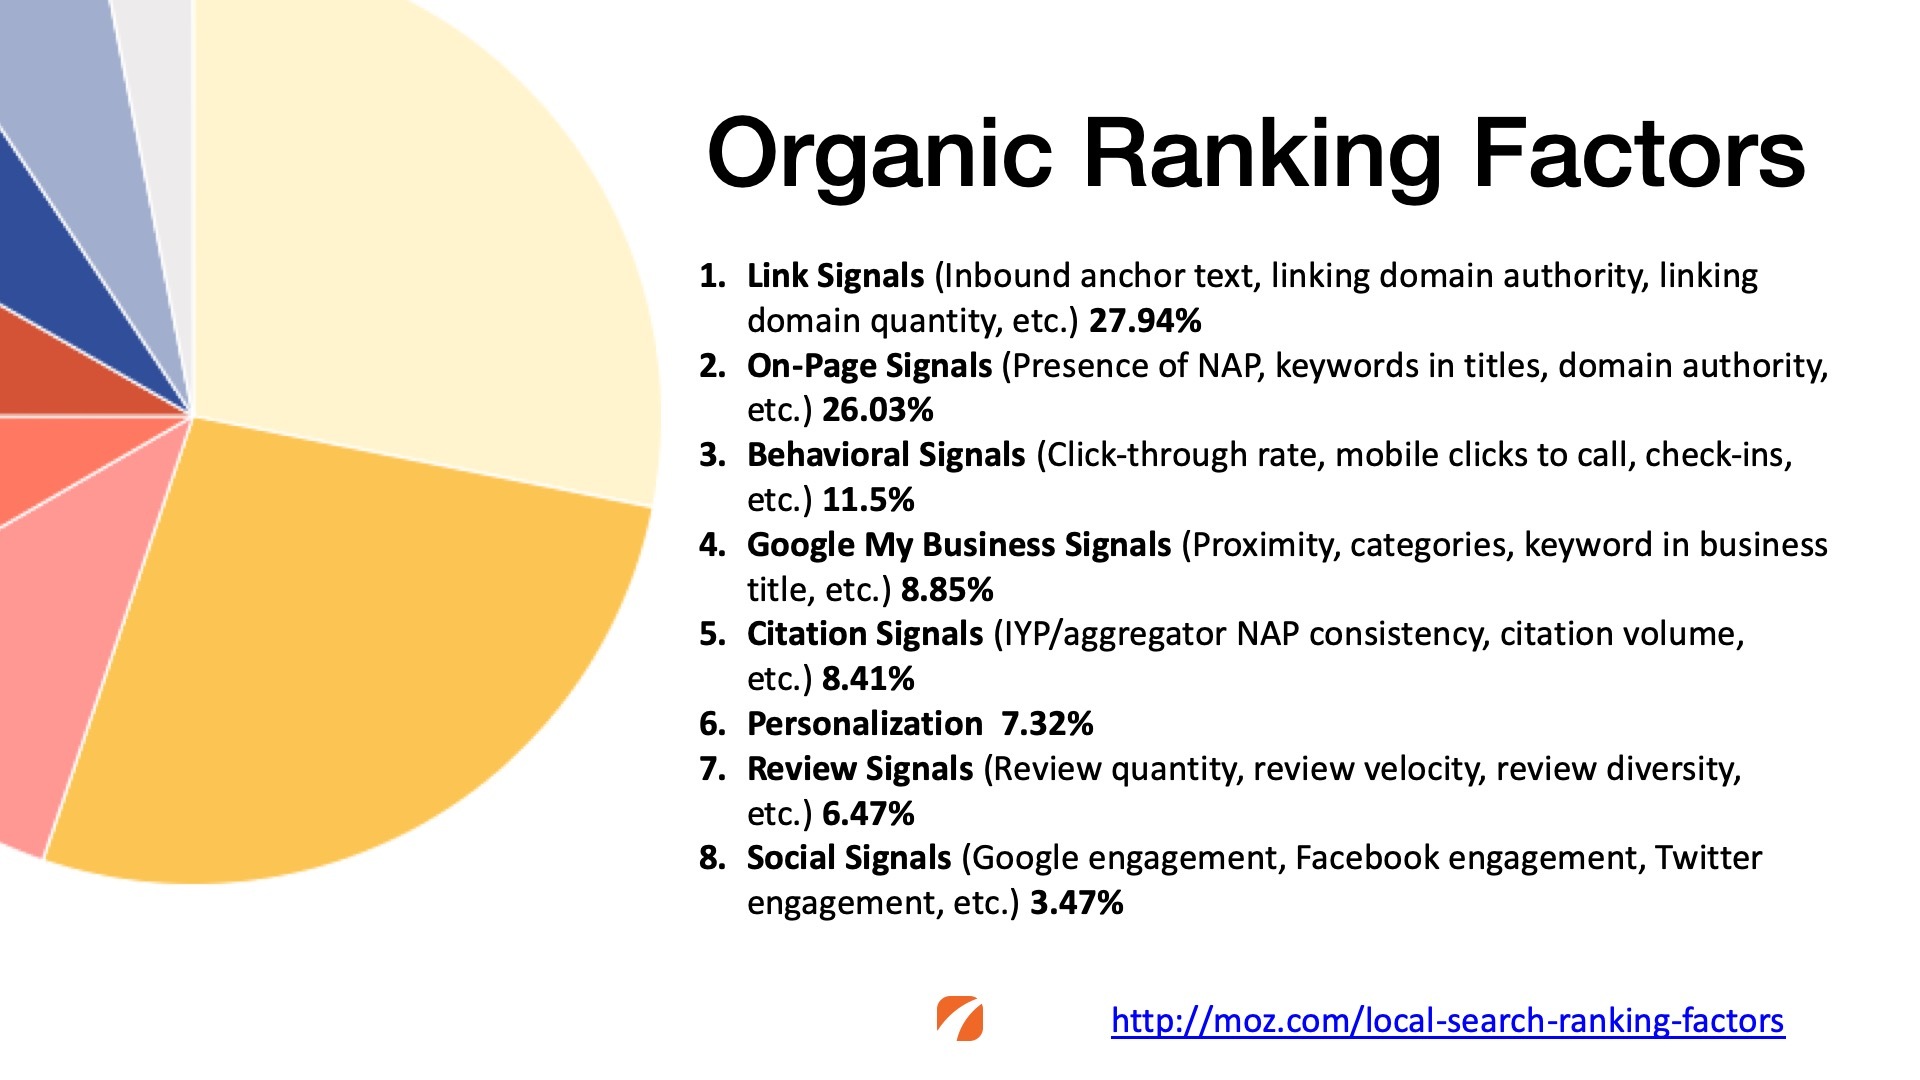 Link signals are the number one organic ranking factor